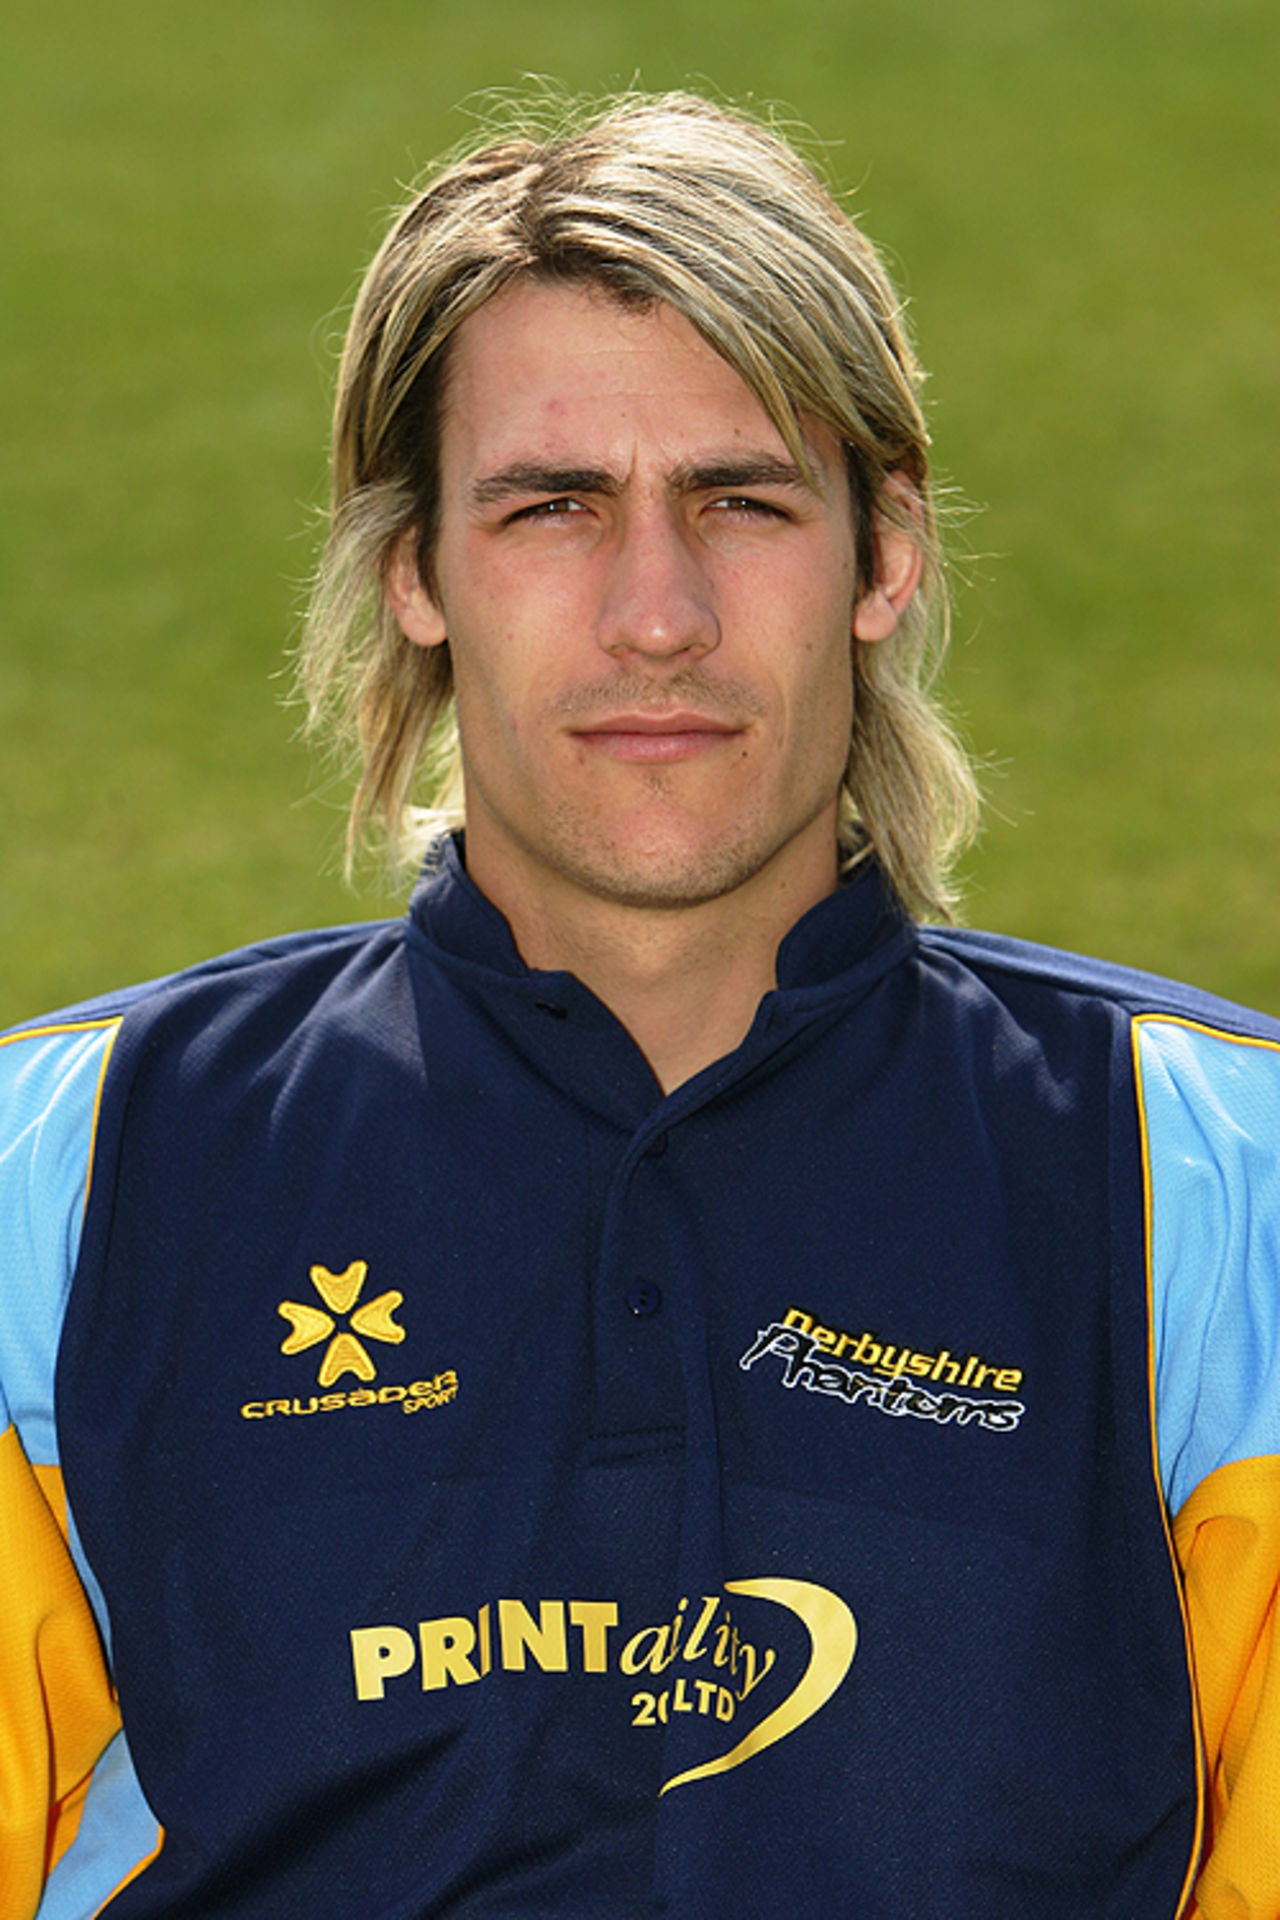 Chris Taylor poses during a Derbyshire CCC photocall, April 16, 2007